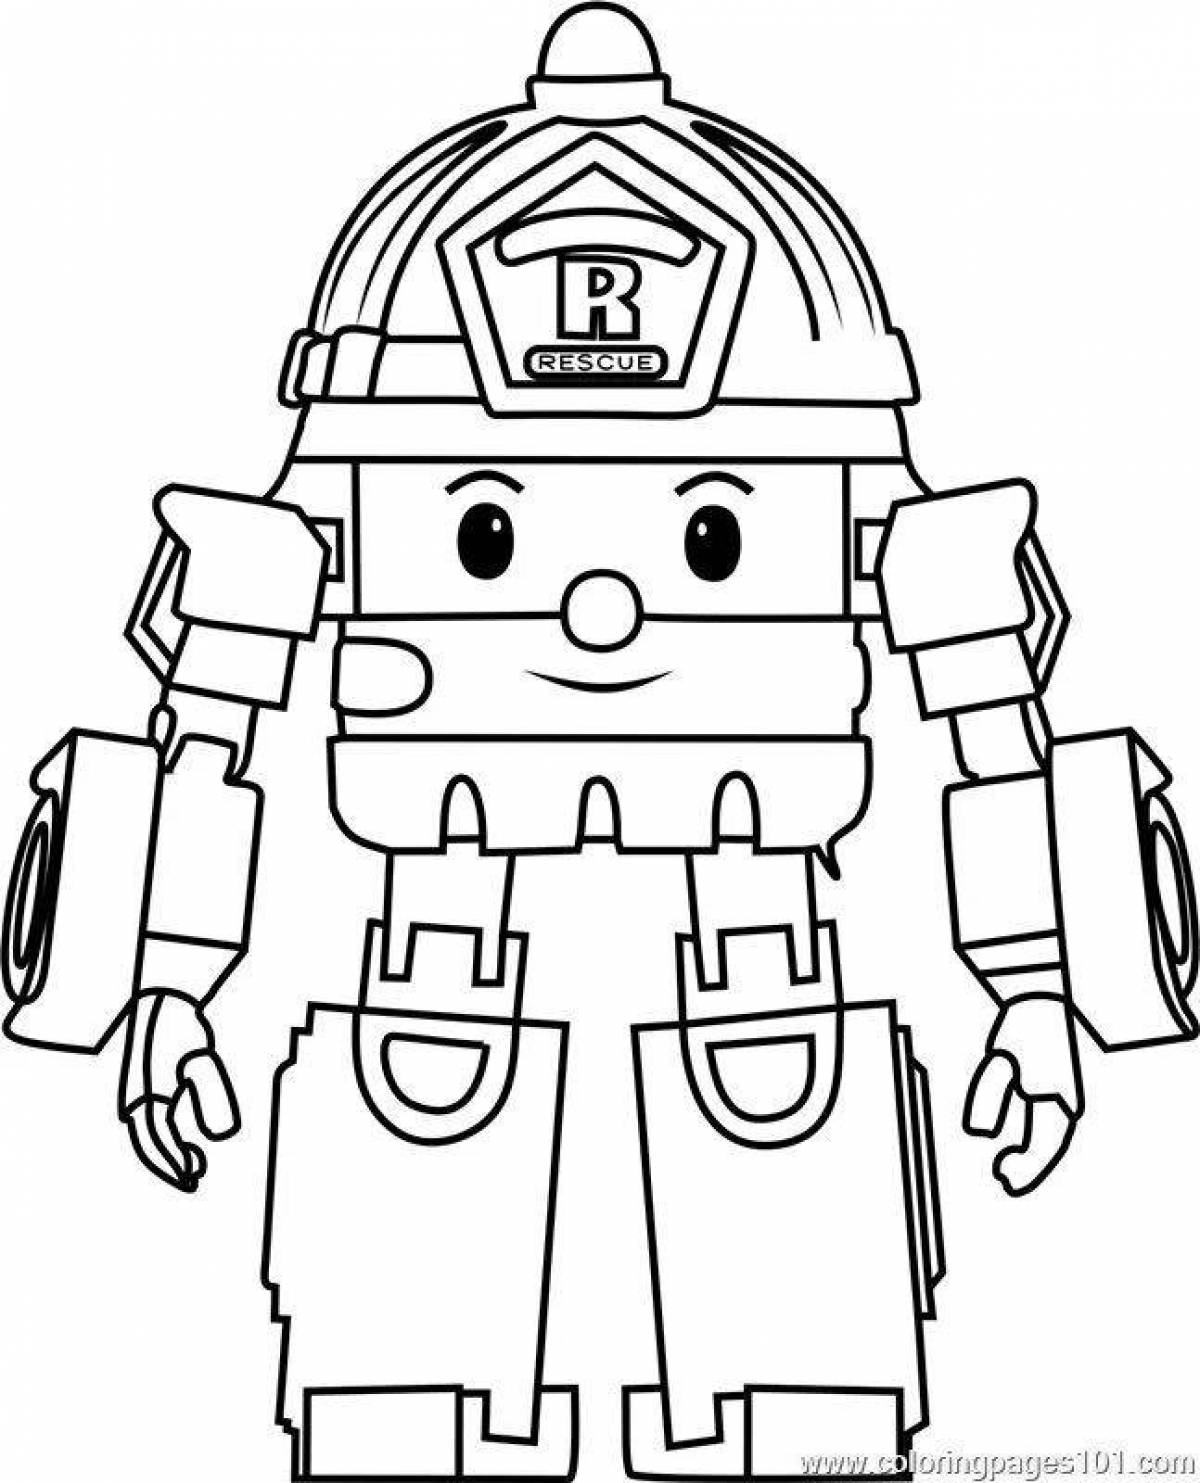 Cute fire robot coloring page